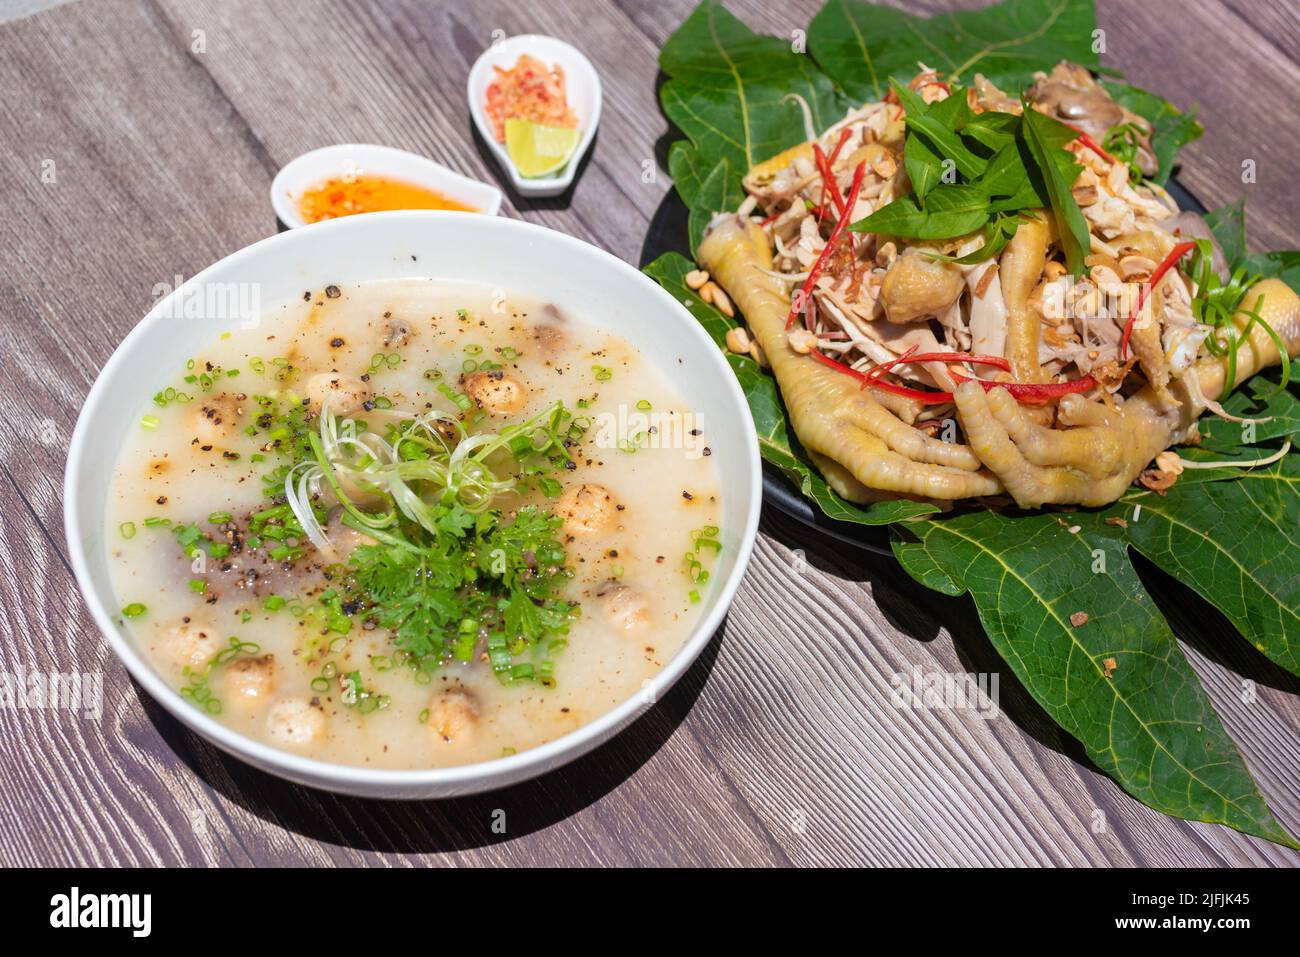 Chicken porridge is cooked from lightly roasted rice, then the rice is really soft. Porridge ingredients include rice, shiitake mushrooms, vegetables Stock Photo